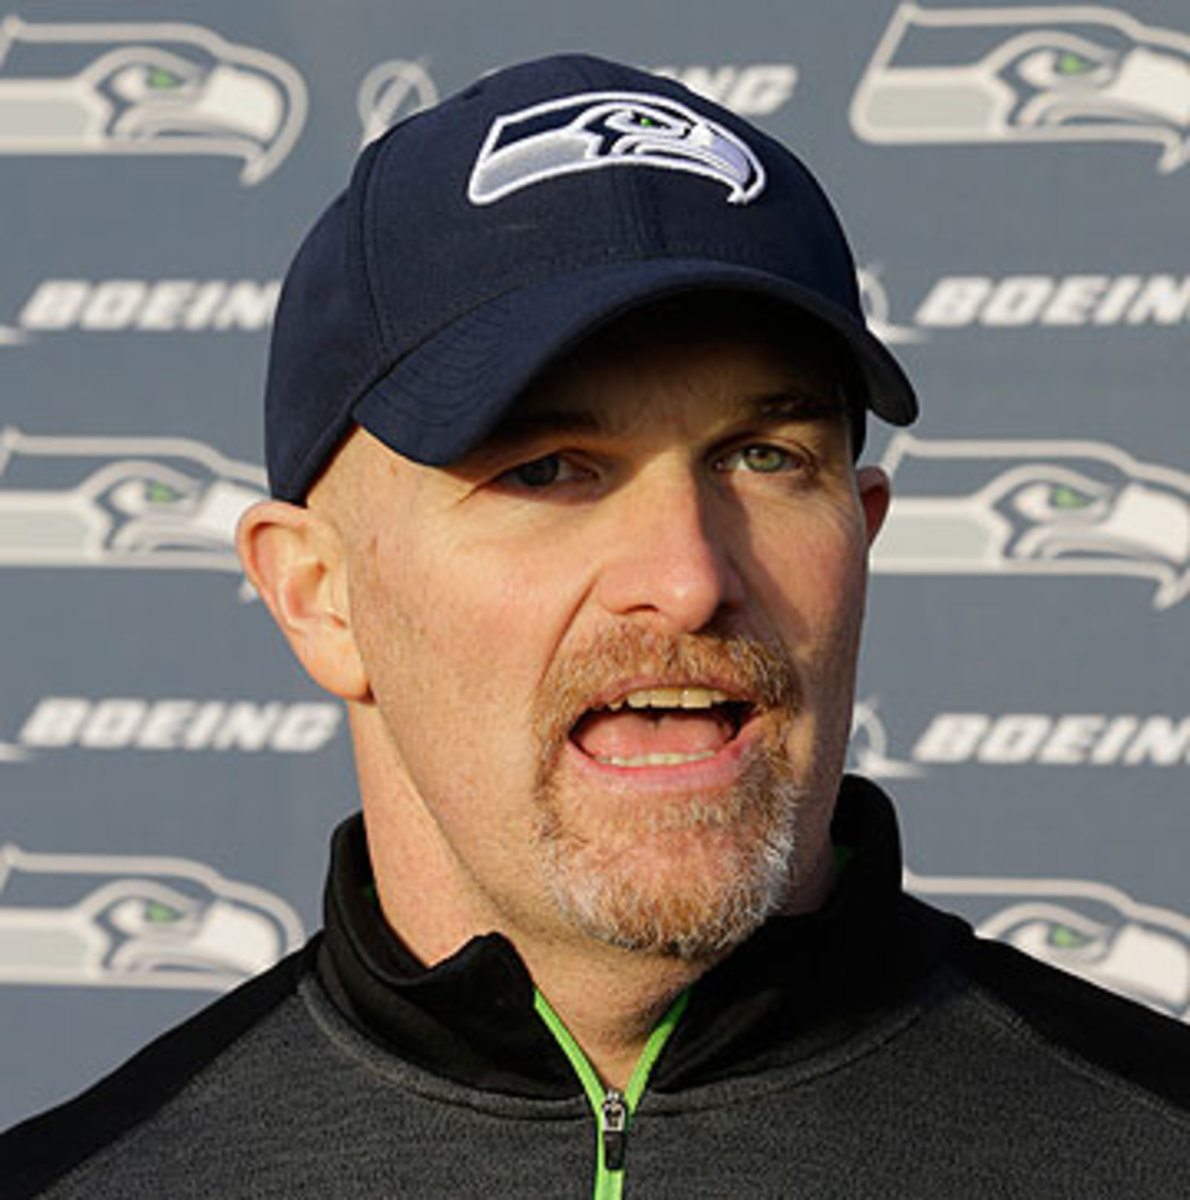 No team can offer Dan Quinn its coaching job until the Seahawks' season is over. (Ted S. Warren/AP)